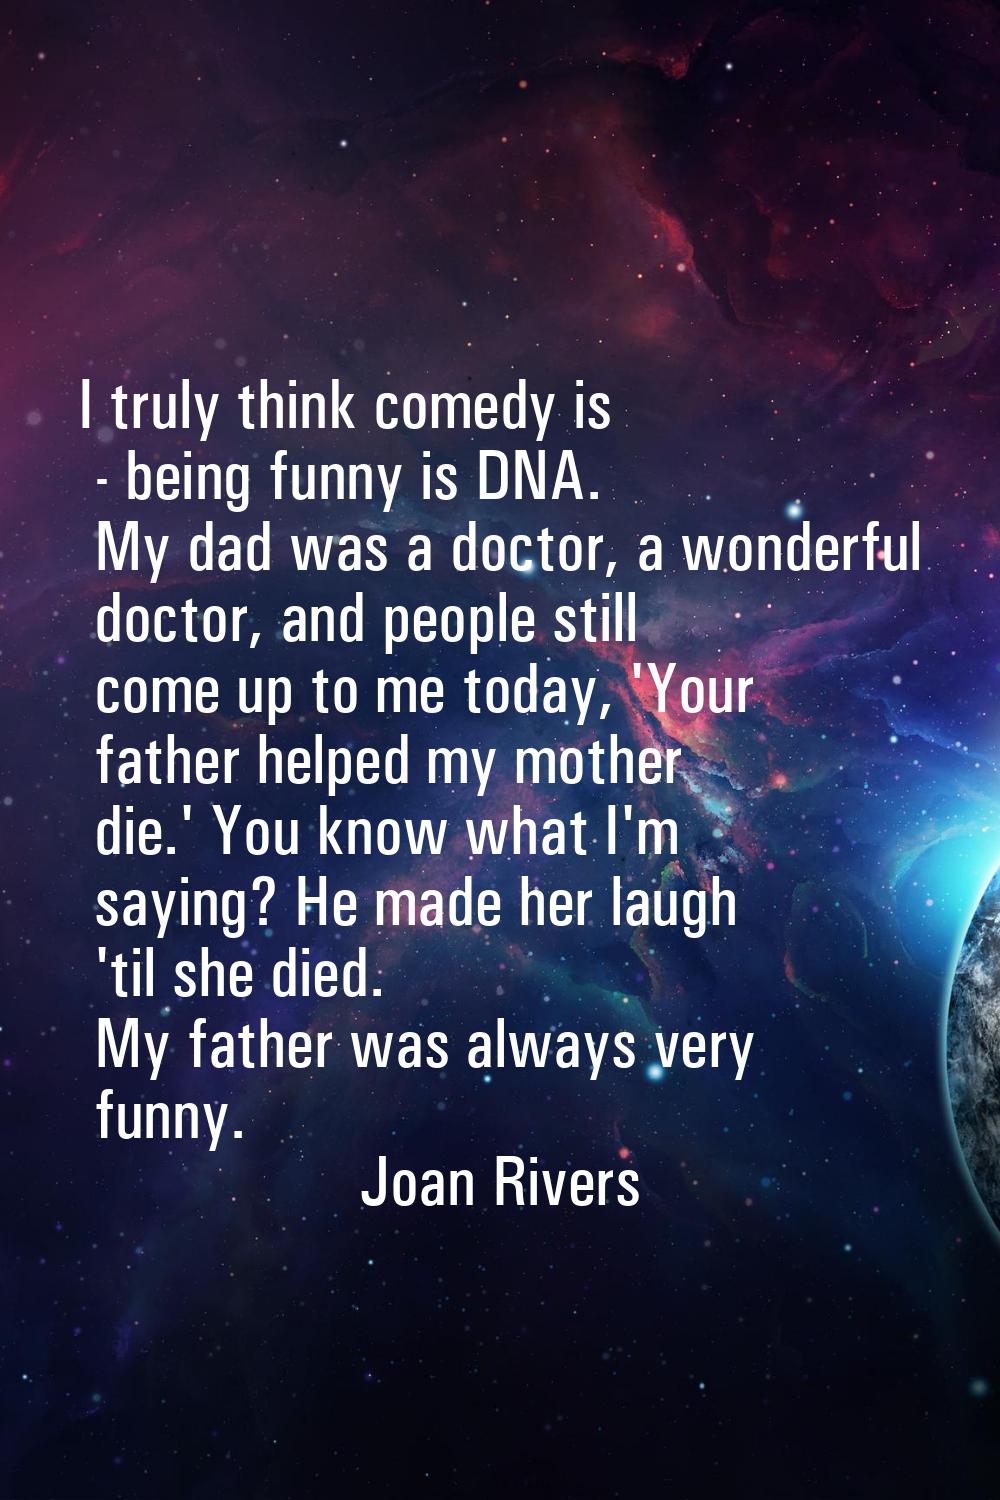 I truly think comedy is - being funny is DNA. My dad was a doctor, a wonderful doctor, and people s